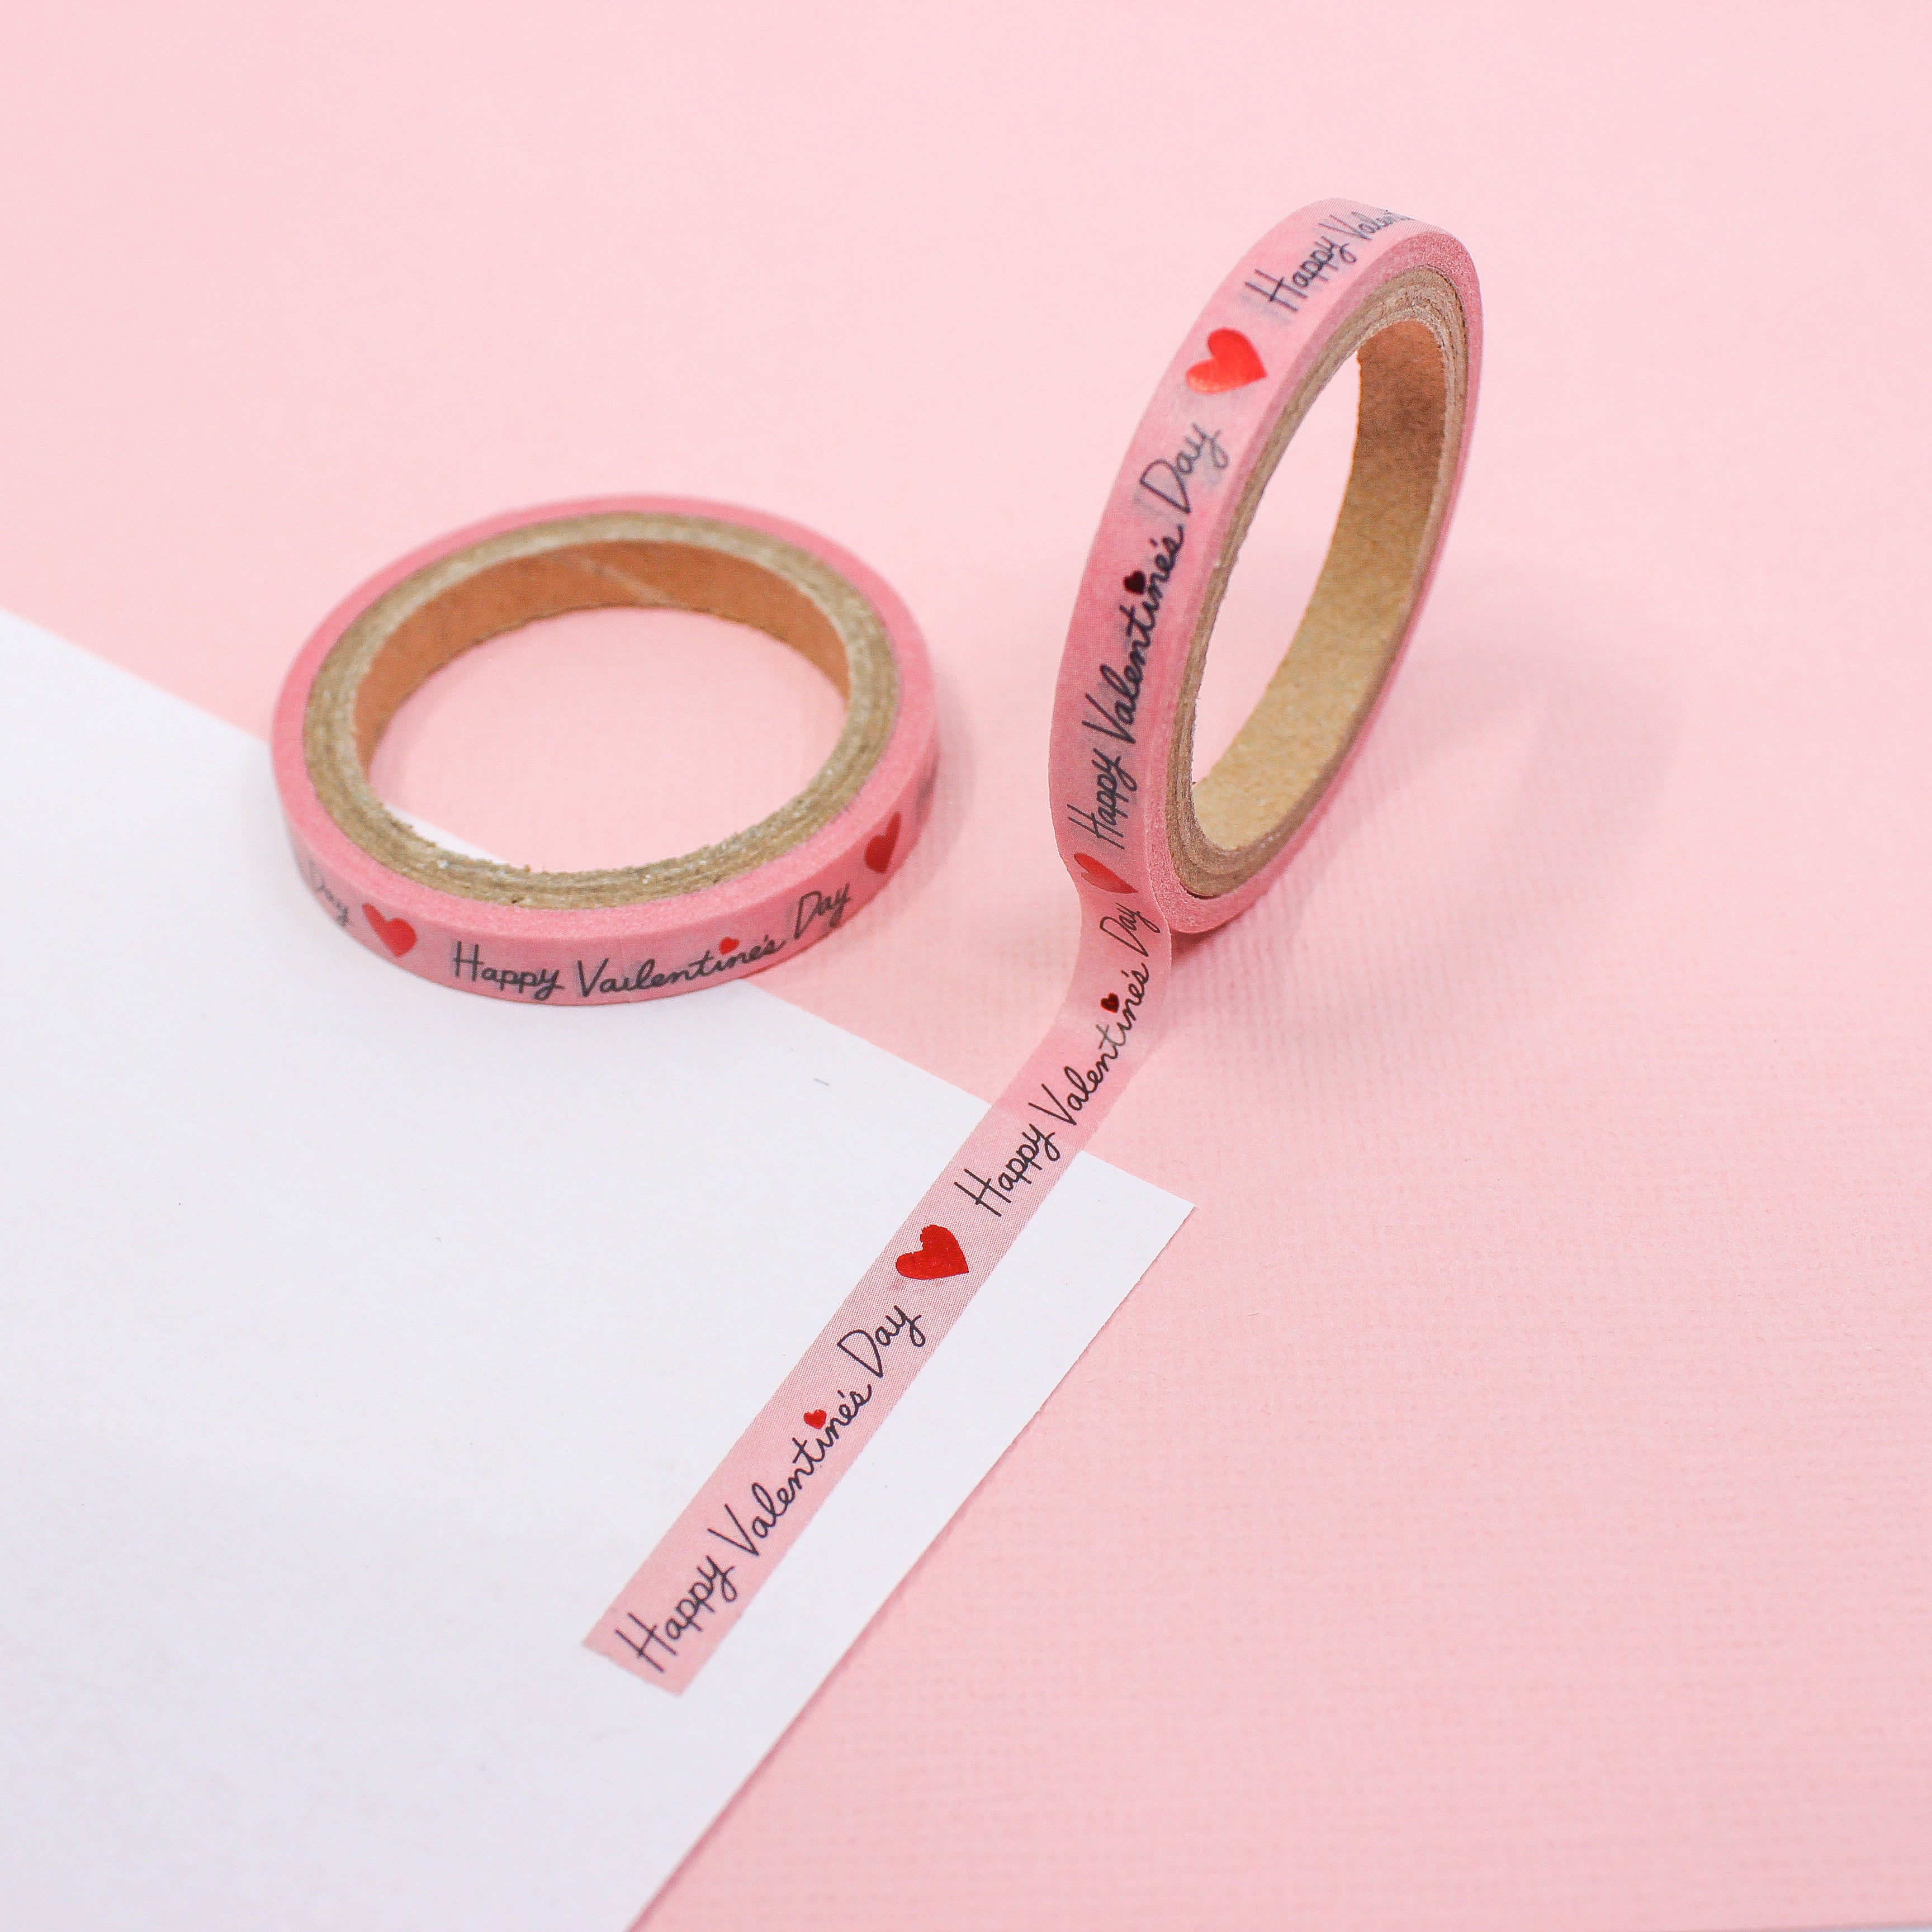 This is a happy valentines day greeting themed washi tape from BBB Supplies Craft Shop